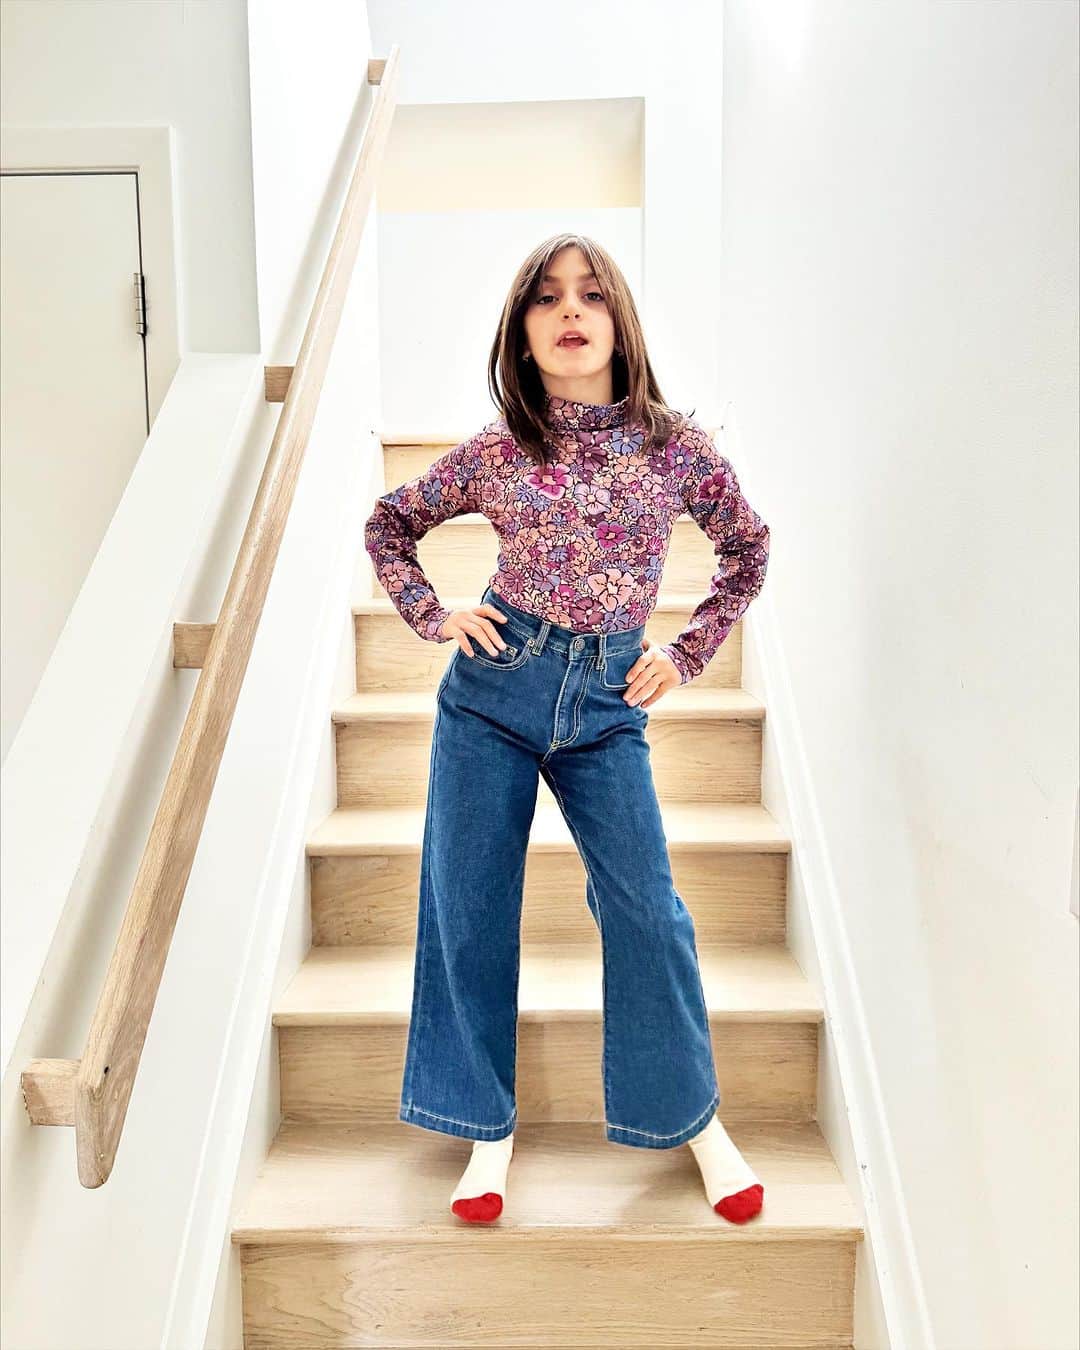 Ilana Wilesのインスタグラム：「I let Harlow pick an outfit from @smallable_store, a French online shop that carries a wide selection of brands and designers from all over the world. She chose these wide leg jeans and this 70s floral print top (which kinda looks like her new bedding) from the @hundred_pieces collection. And just so you don’t think she’s moving away from her fruit motif, she also picked some socks with bananas on them! You can shop the @hundred_pieces collection as well as 900+ international brands in categories that include clothes, shoes, accessories, and decor for all ages, all in one convenient place at the link in my bio! Use code MOMMYSHORTSHP to get 15% off your order (over 100€) through 11/28! #hundredscrew」